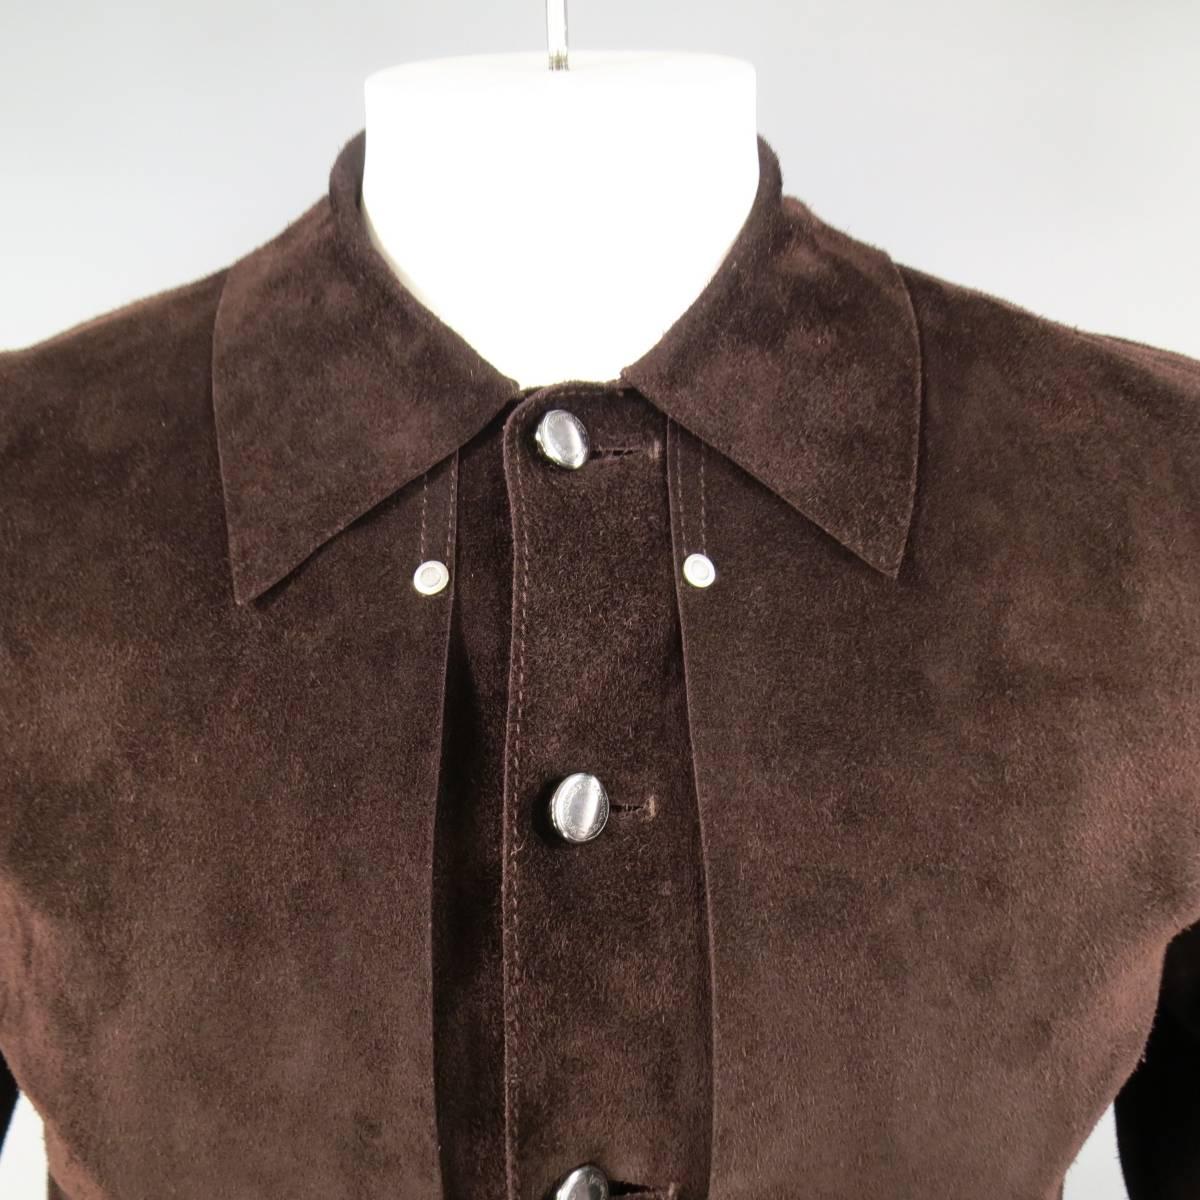 This impeccable YVES SAINT LAURENT cropped trucker style jacket comes in rich, chocolate brown distressed suede and features a raw edge pointed collar, frontal overlay panels with silver tone stud details, engraved buttons, internal button panel,